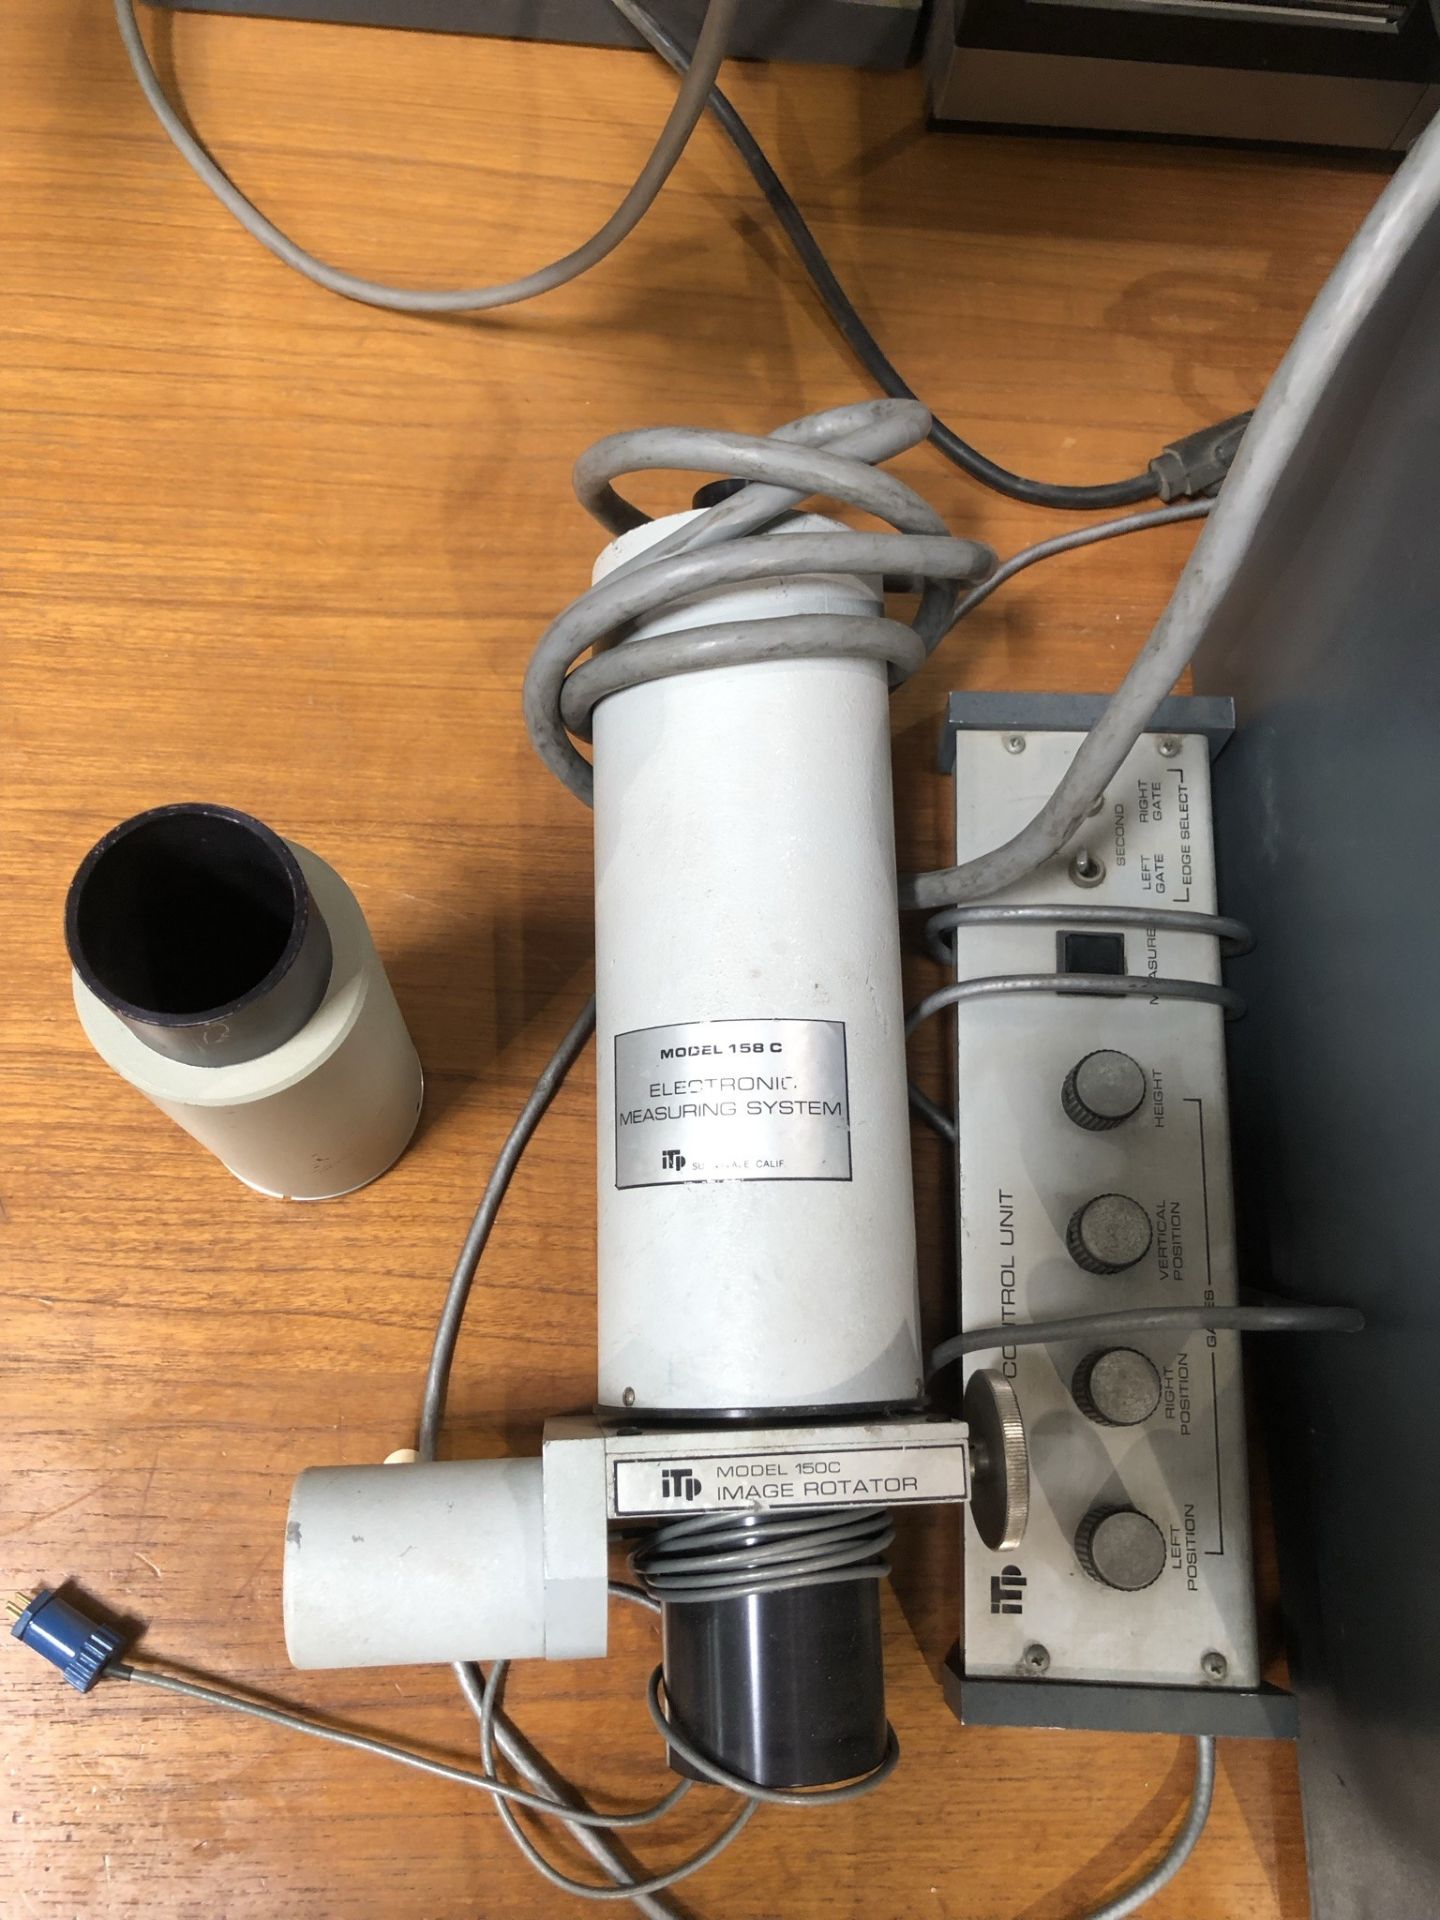 Lot of Misc. Microscopes and optical gauging systems. Lot includes two optical laps, and a nice - Image 15 of 28